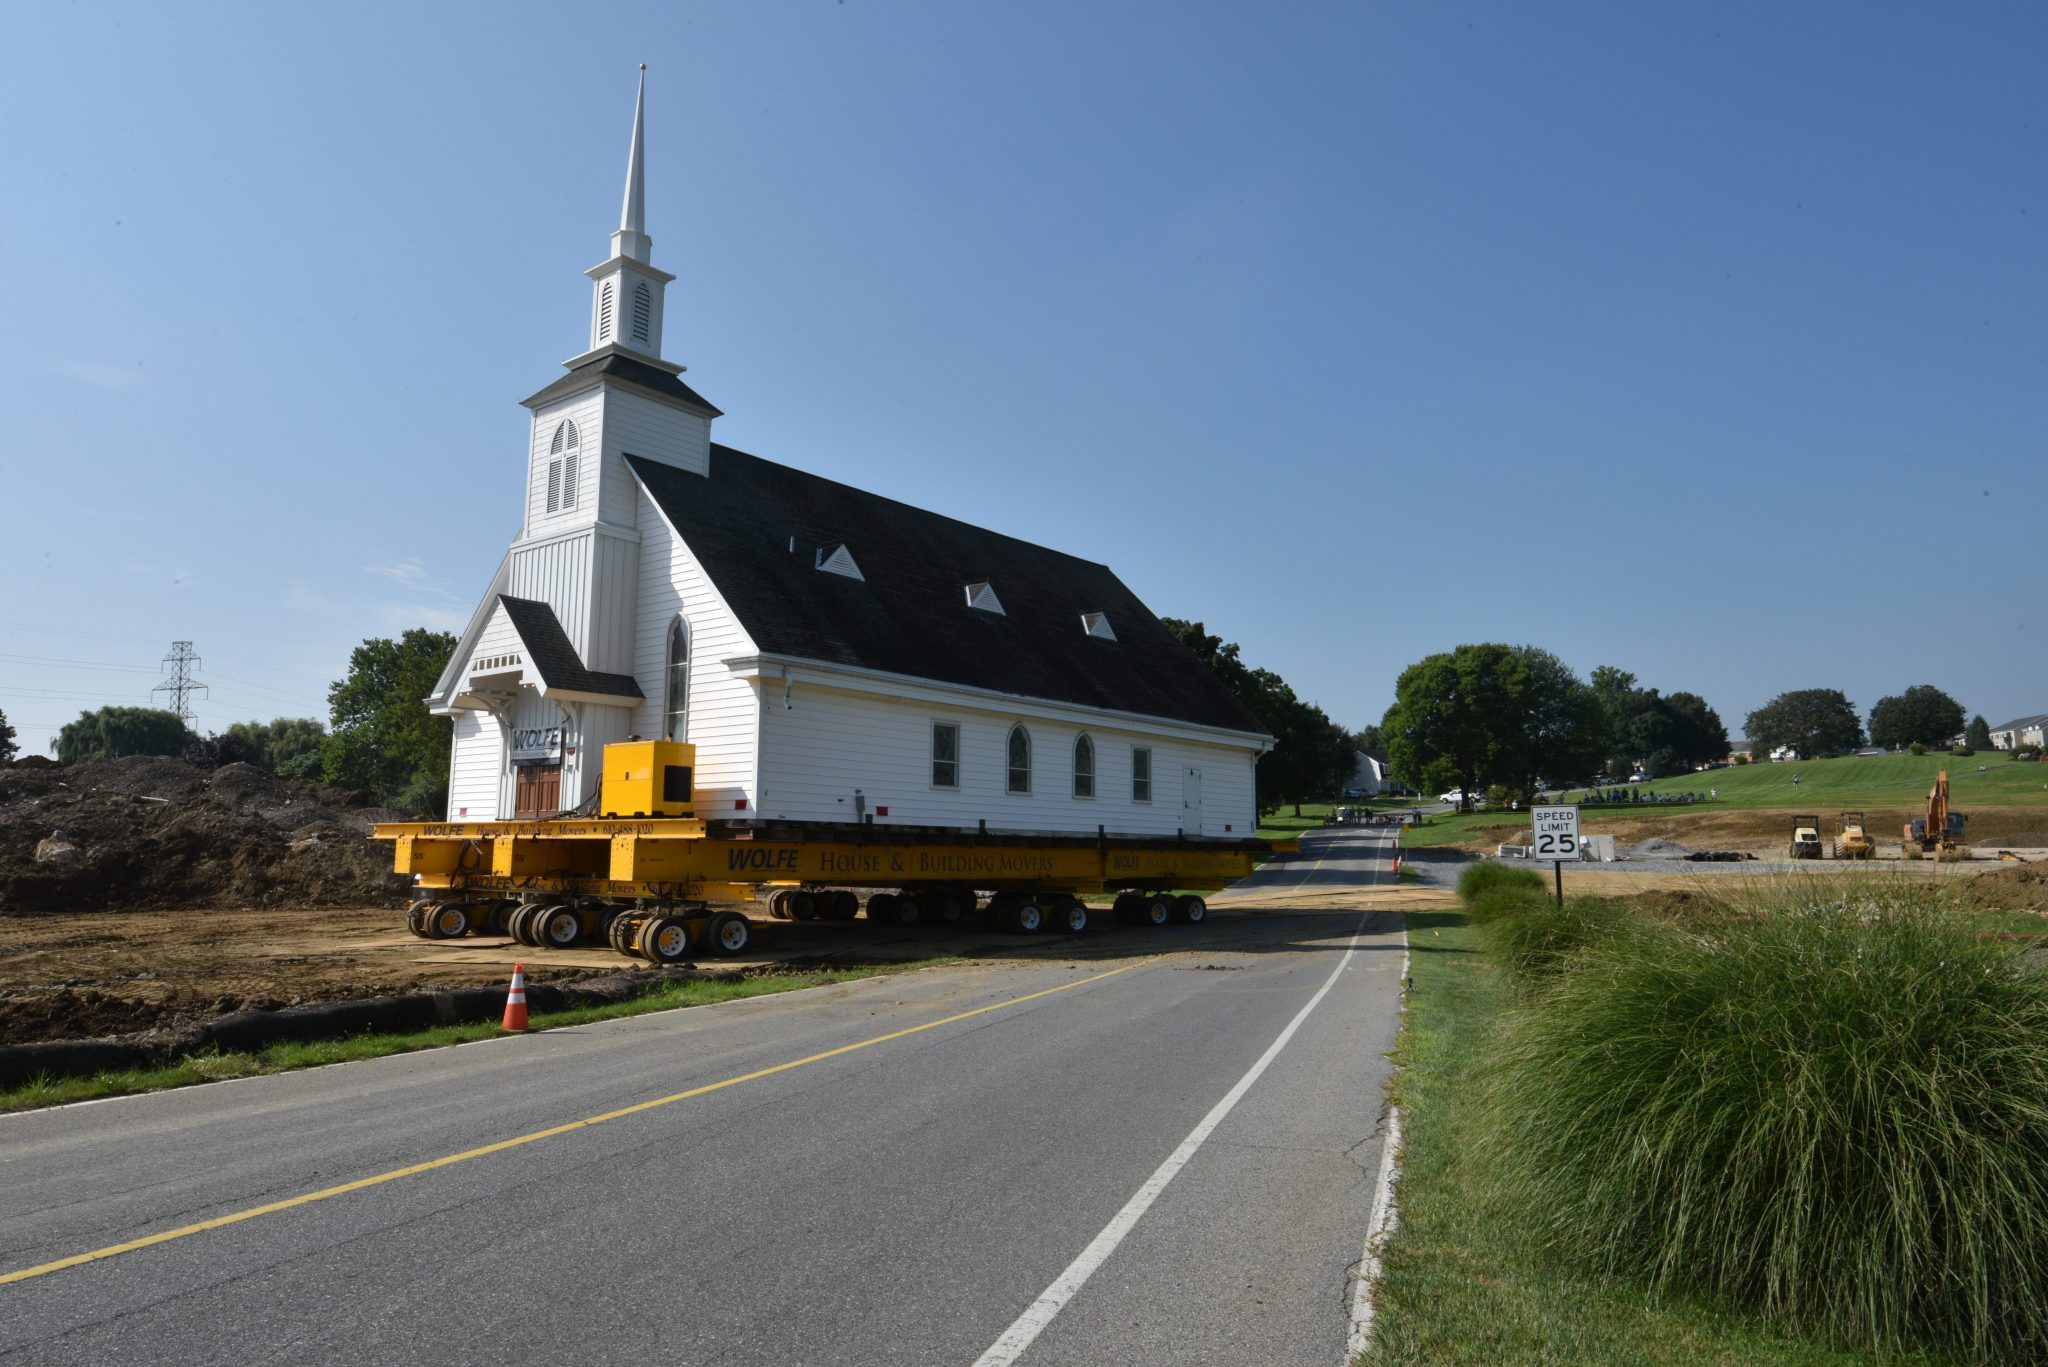 Willow Valley Chapel on dolly merging onto road.